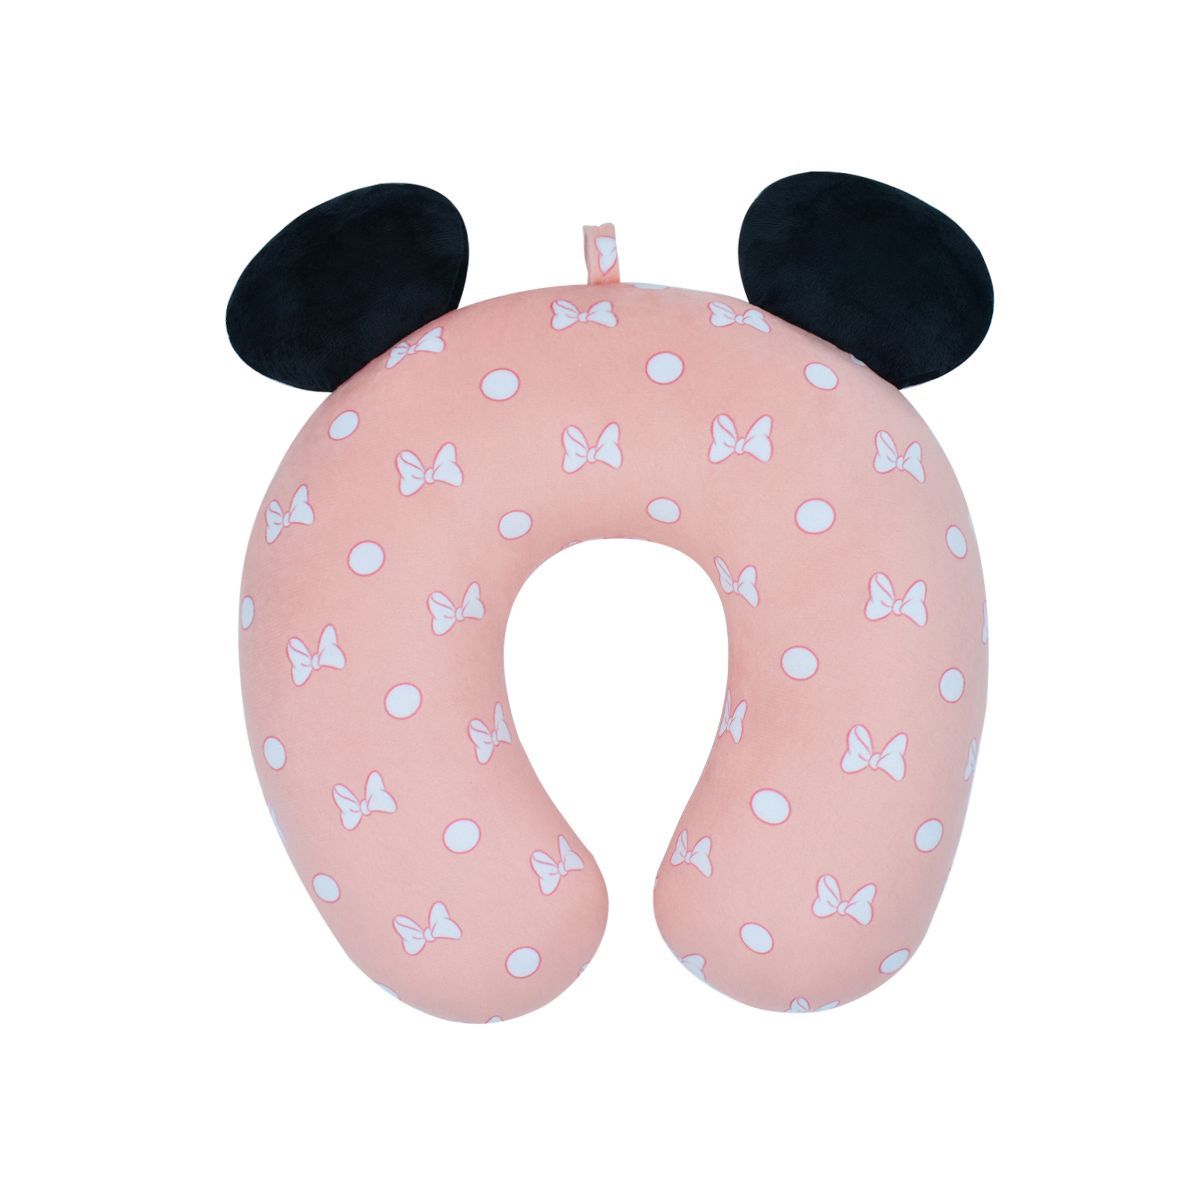 Ful Disney Minnie Mouse Bows and Polka Dots Portable Travel Neck Pillow, Pink | Target